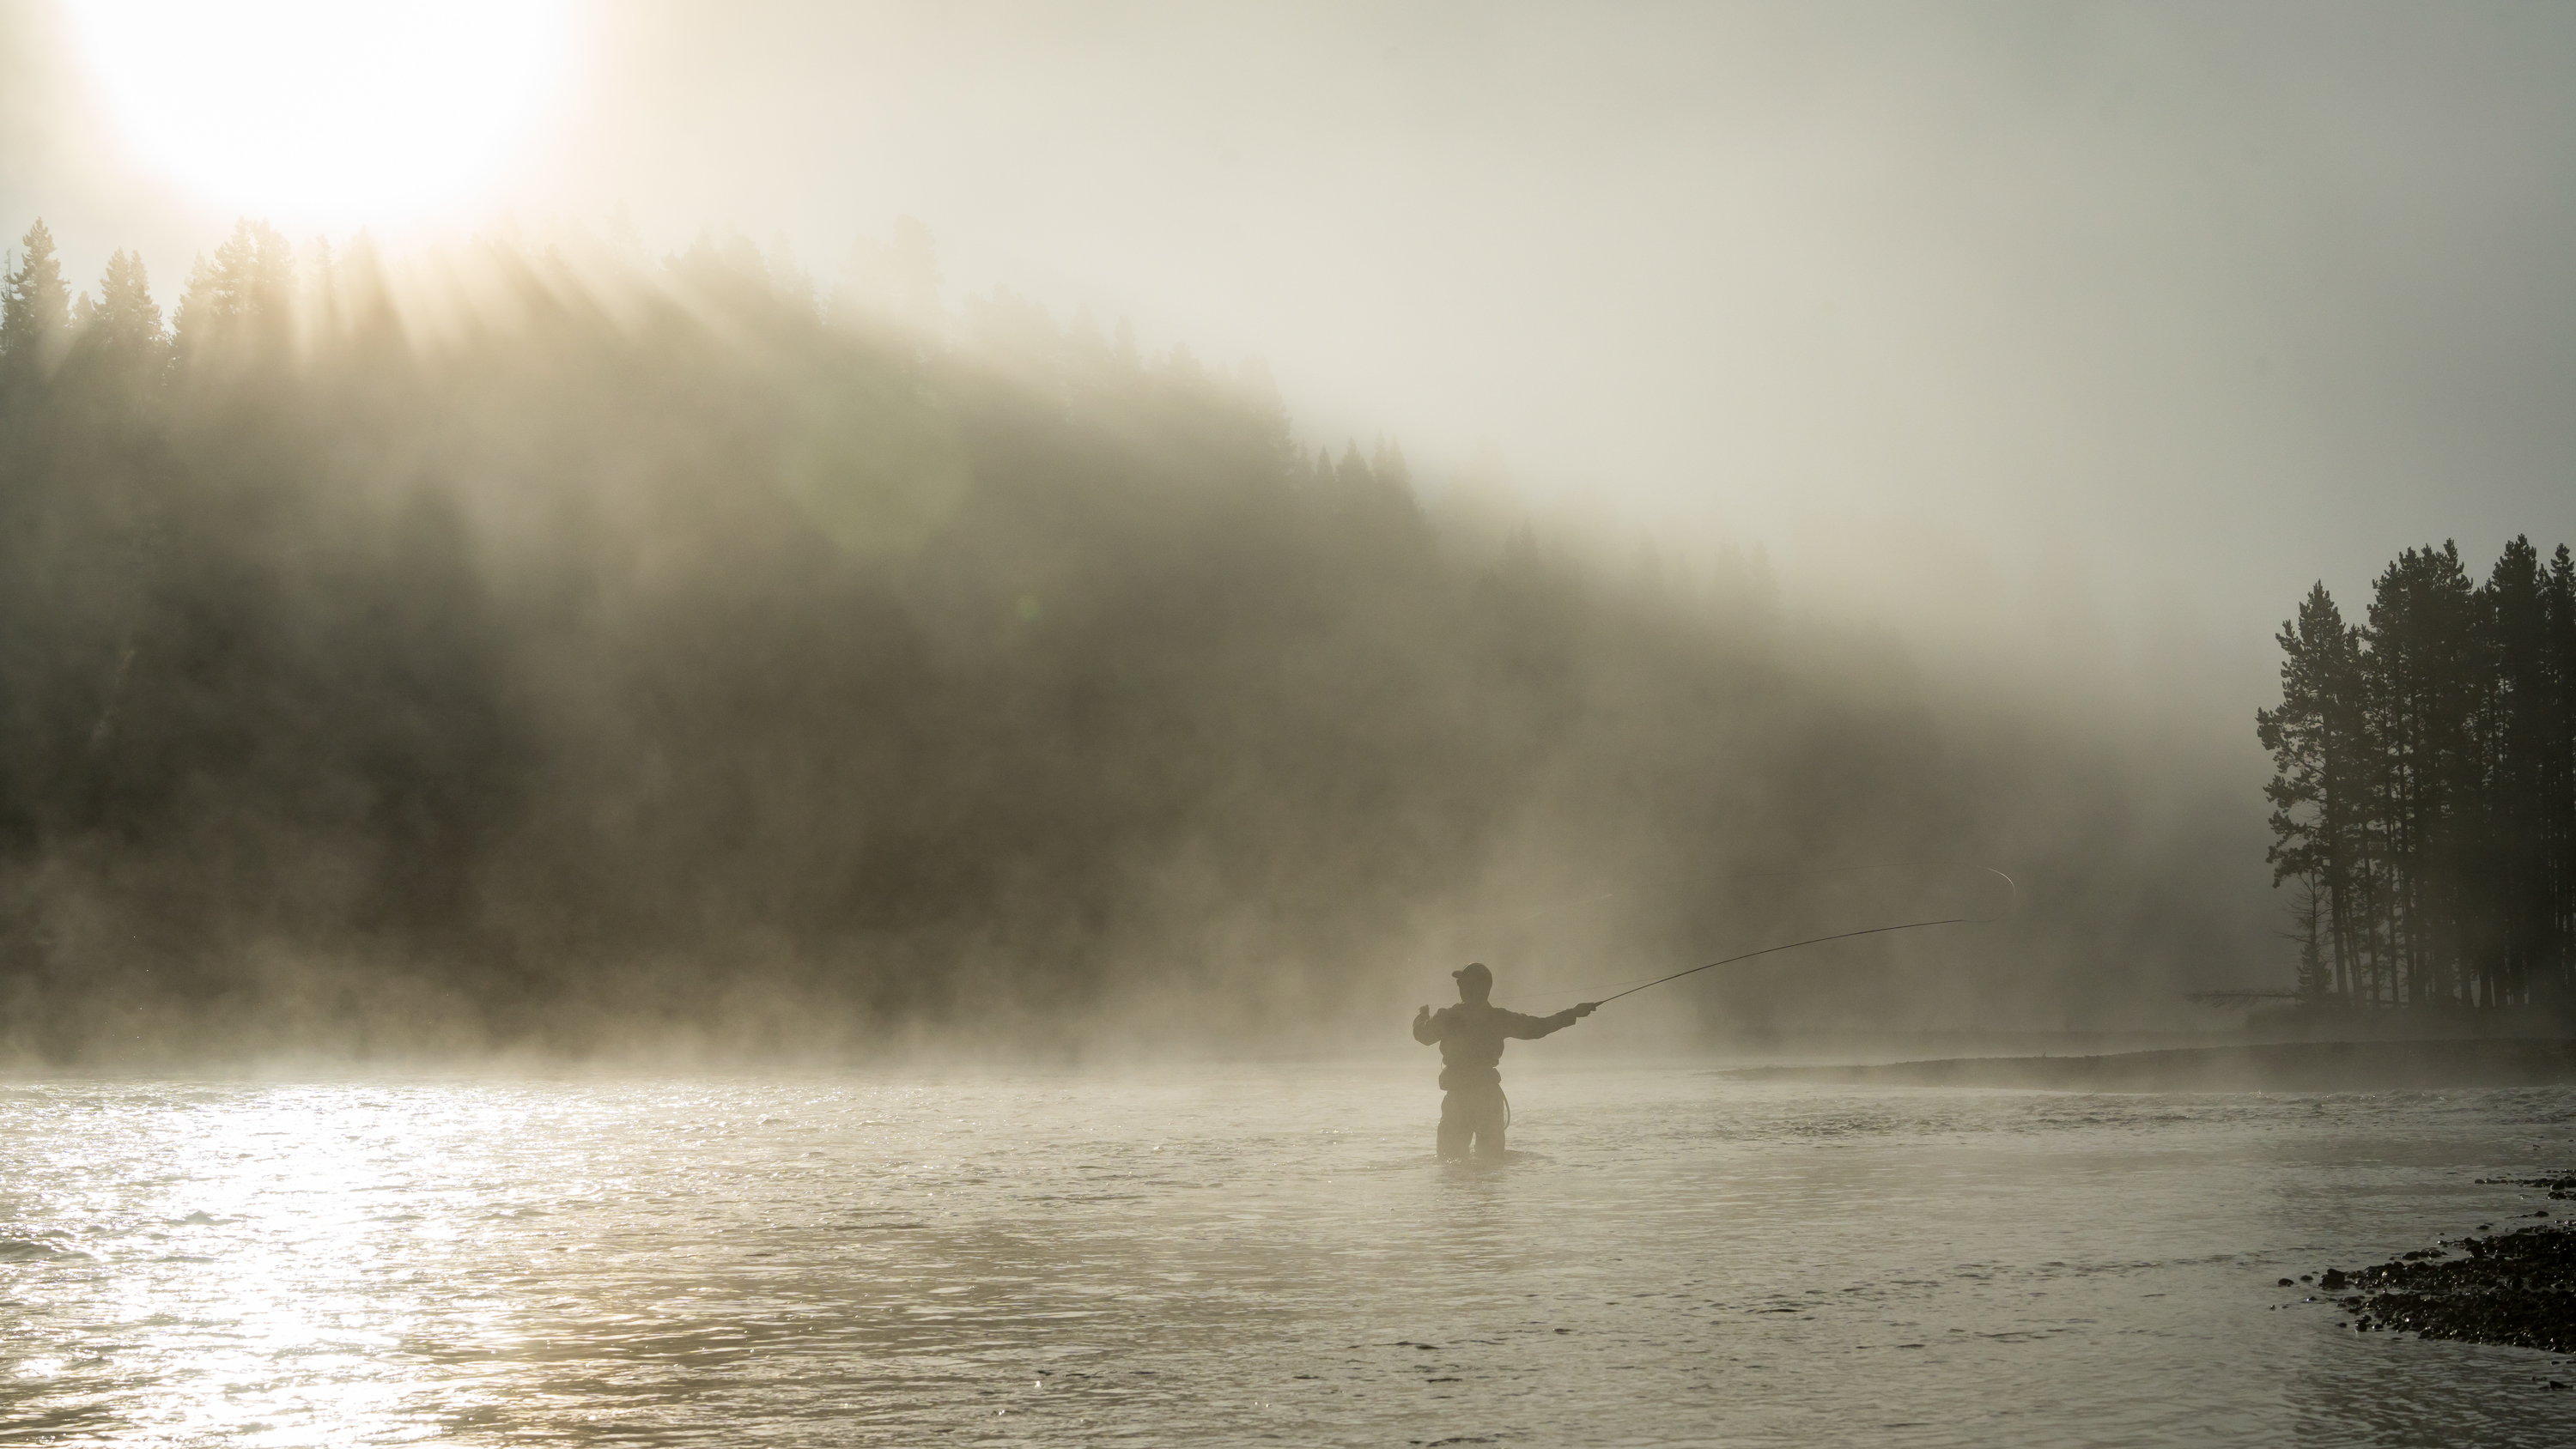 Fly fisherman on the Yellowstone River with early morning fog